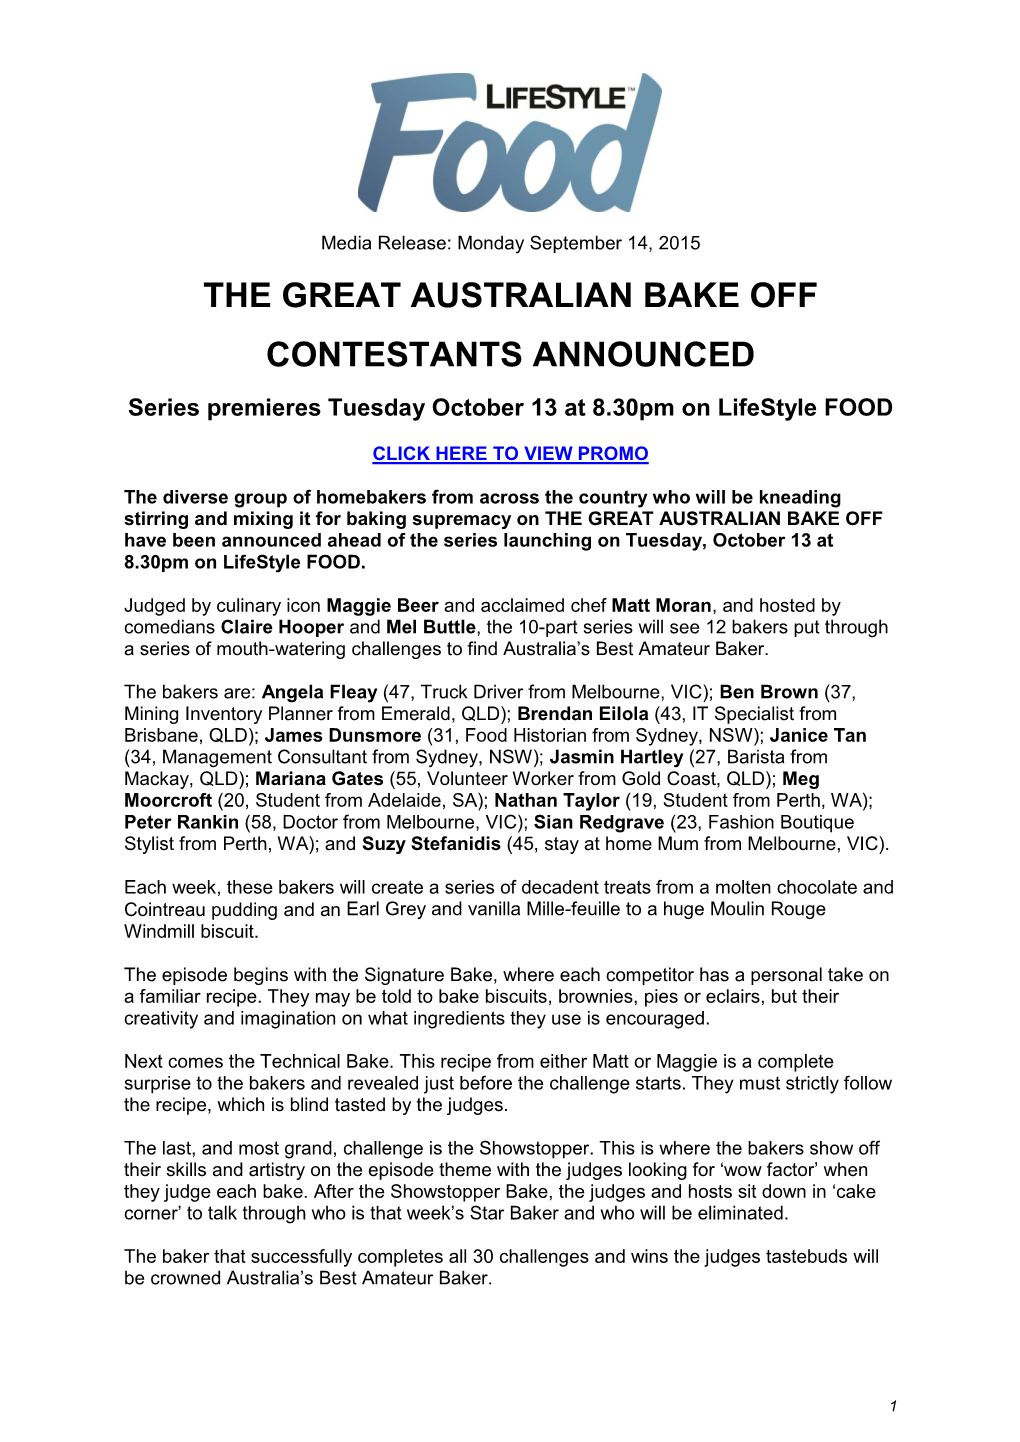 THE GREAT AUSTRALIAN BAKE OFF CONTESTANTS ANNOUNCED Series Premieres Tuesday October 13 at 8.30Pm on Lifestyle FOOD